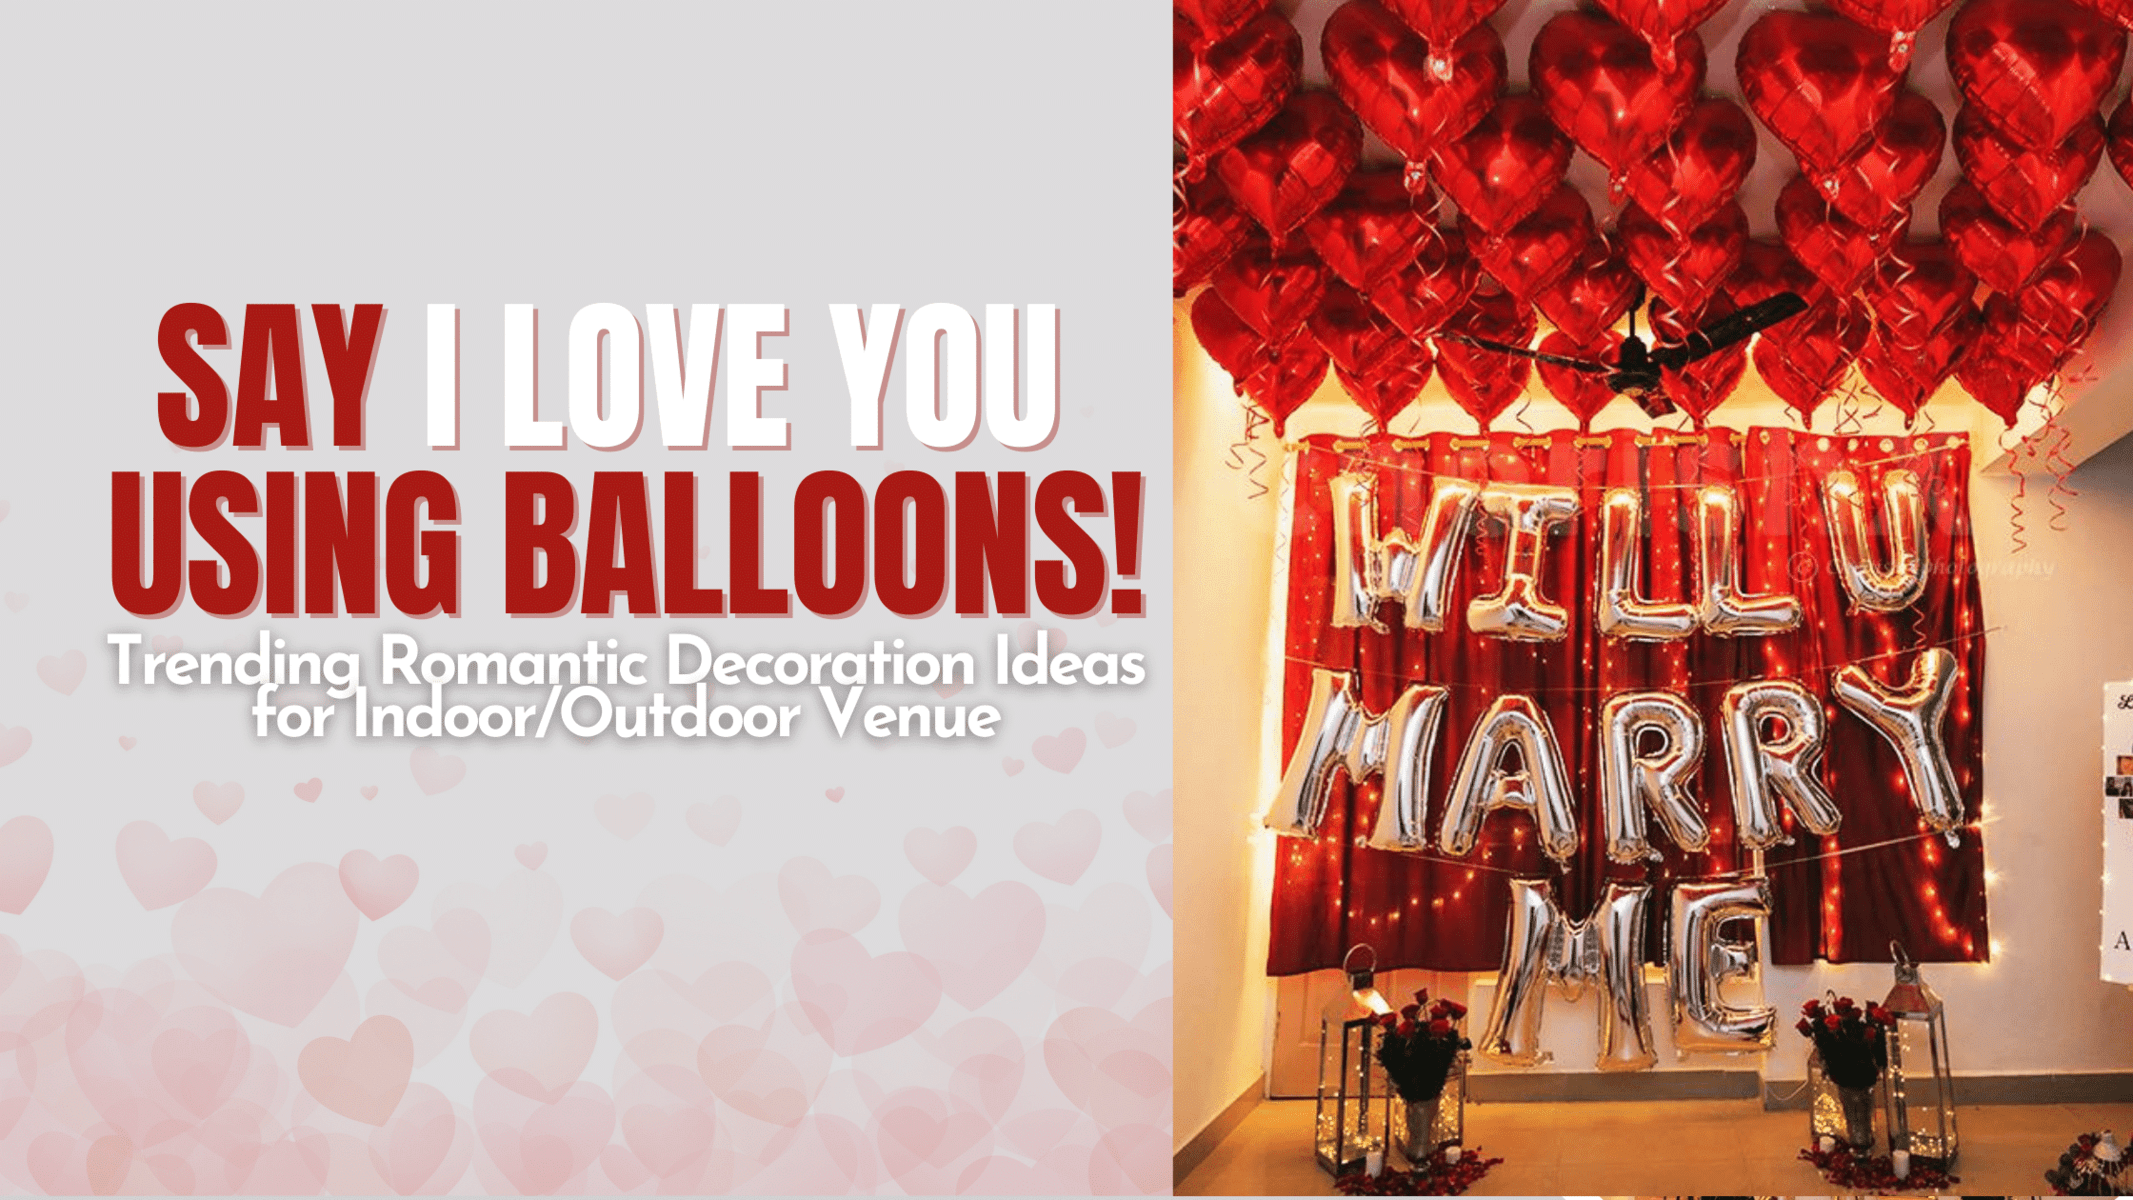 Say I Love You using Balloons! Trending Romantic Decoration Ideas for Indoor/Outdoor Venue